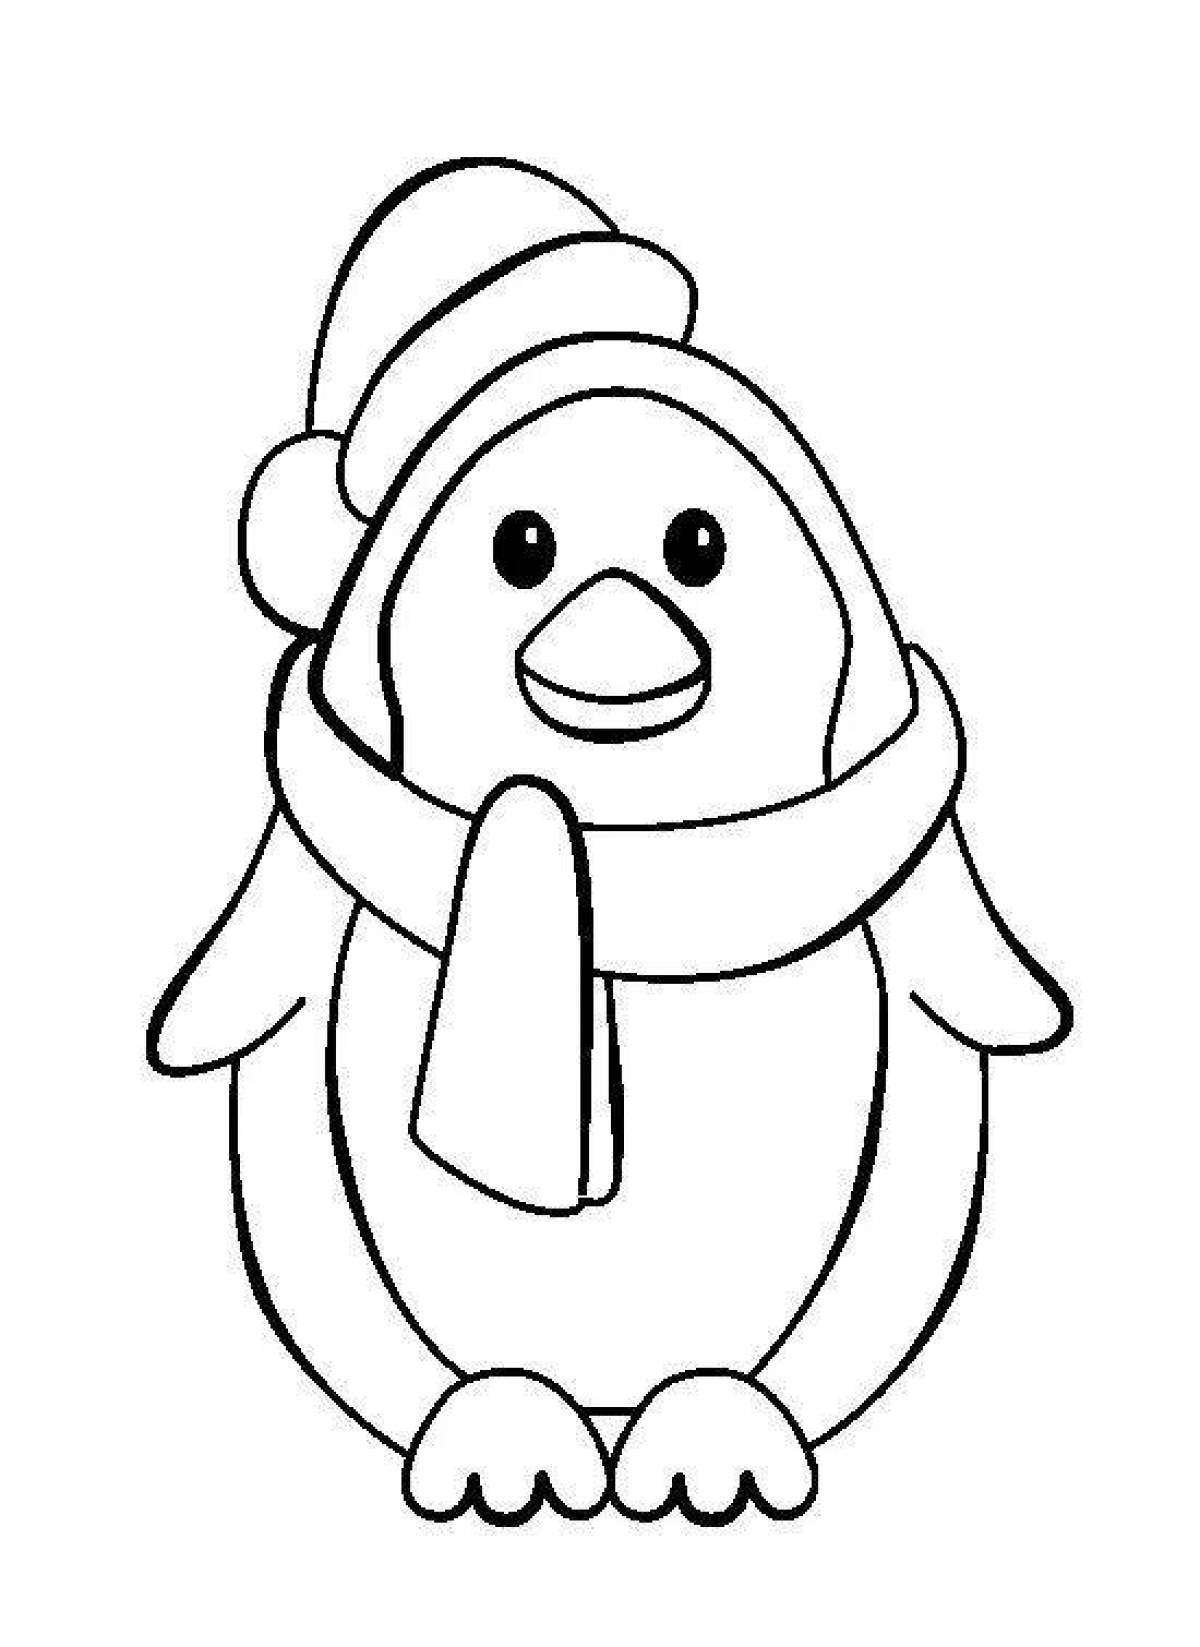 Funny little penguin coloring book